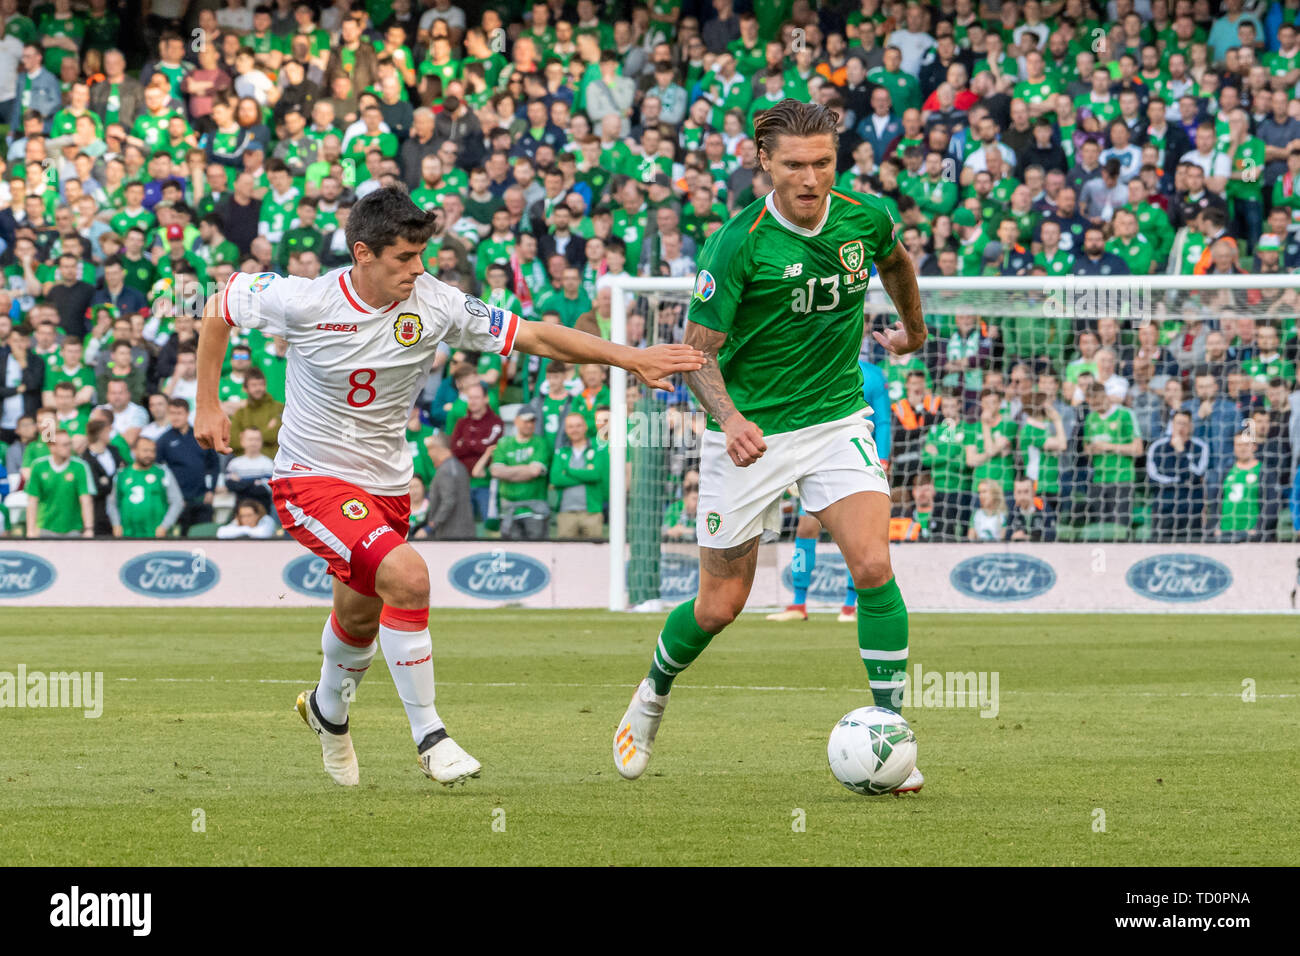 Dublin, Ireland. 10th June, 2019. Anthony Bardon and Jeff Hendrick in action during the European Championship 2020 Qualifying Round of Gibraltar vs Ireland in the Aviva Stadium, Dublin. Ireland 2-0 Gibraltar Credit: SOPA Images Limited/Alamy Live News Stock Photo